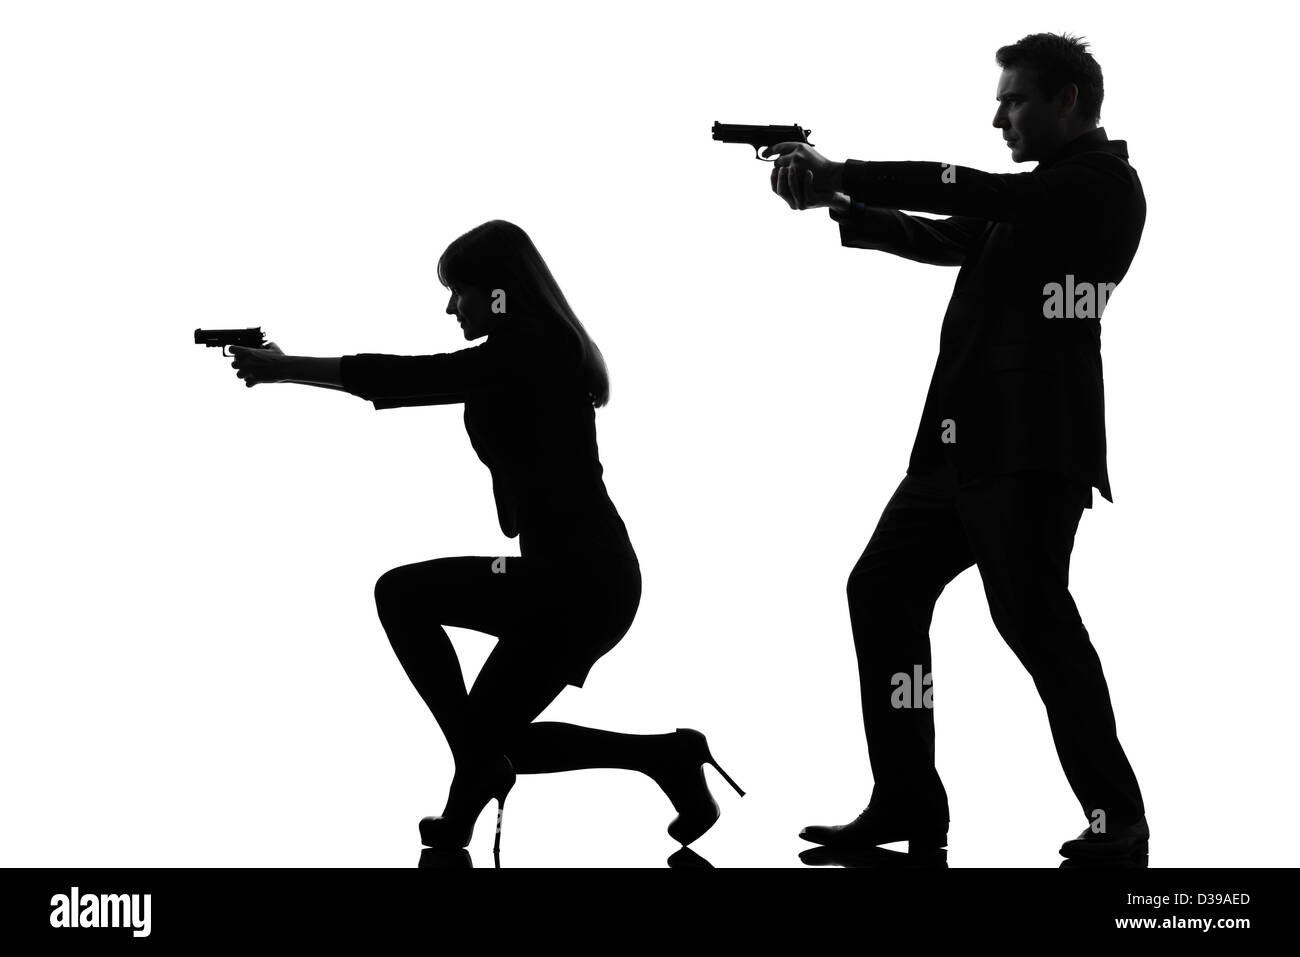 one  man detective secret agent criminal with gun in silhouette studio isolated on white background Stock Photo